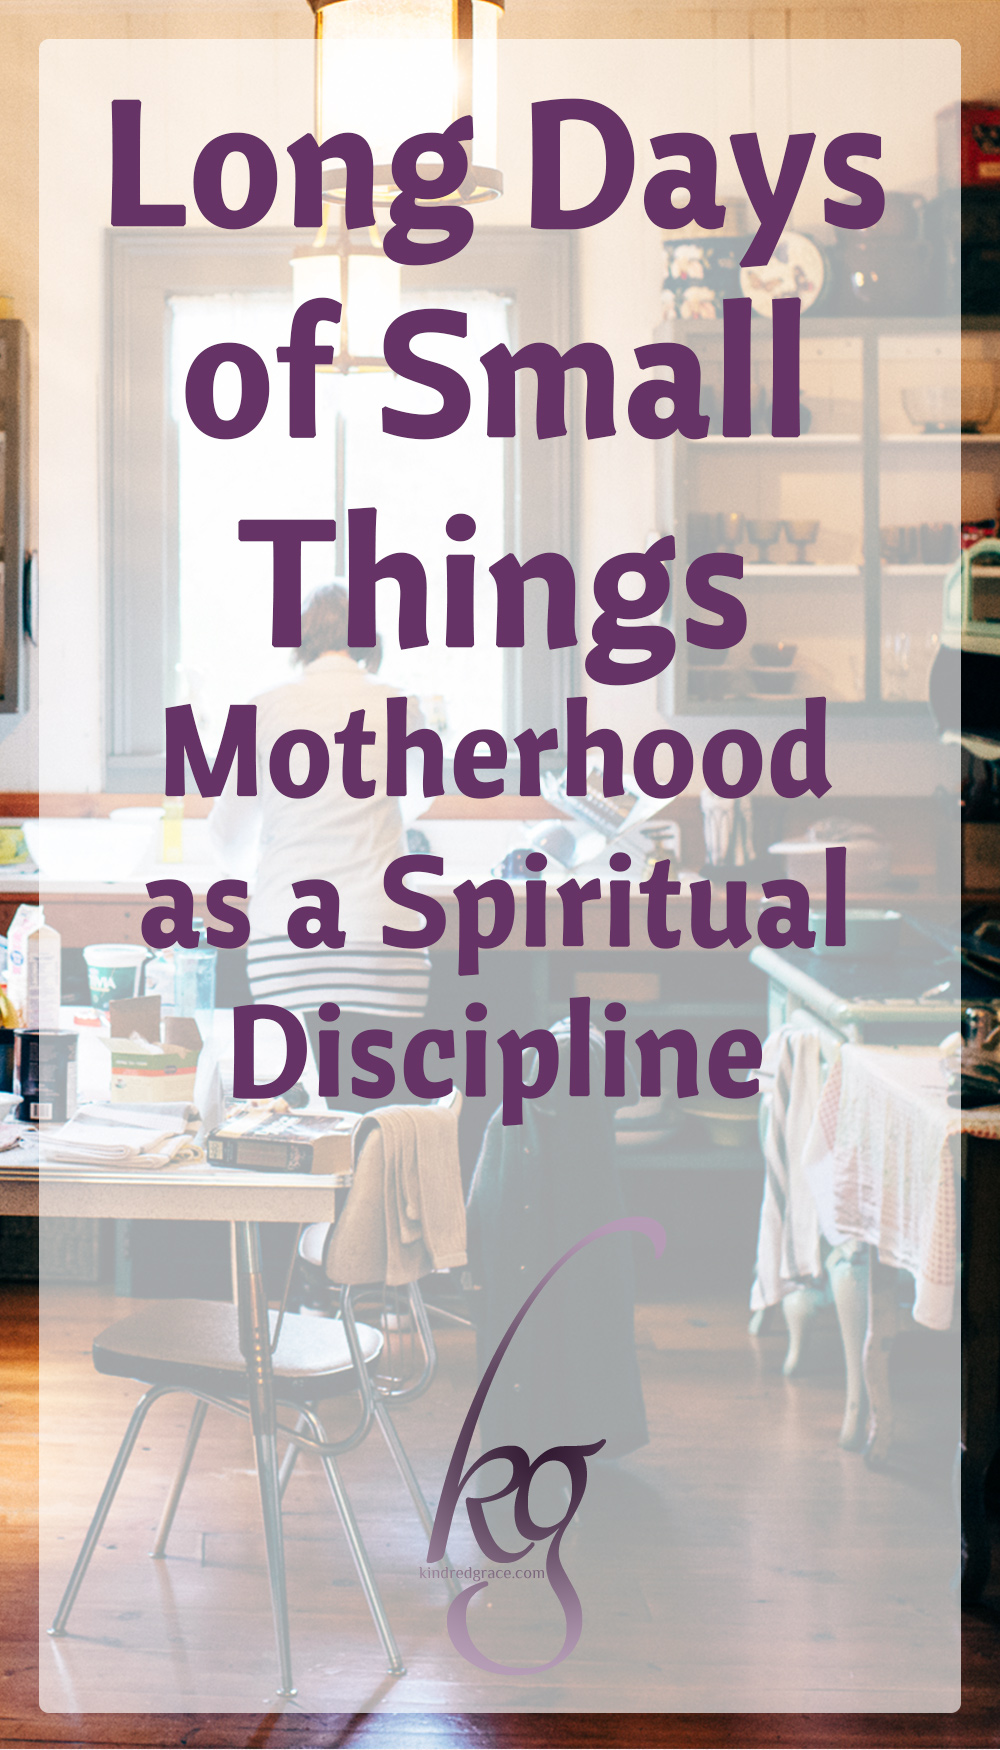 Spiritual disciplines as the mother of young children often look less than impressive, at least for me. But somewhere, in the depths of my soul, I want those things.

I want to be connected to God in every way, not just grabbing at bits and pieces as I rush to the next urgent task. via @KindredGrace